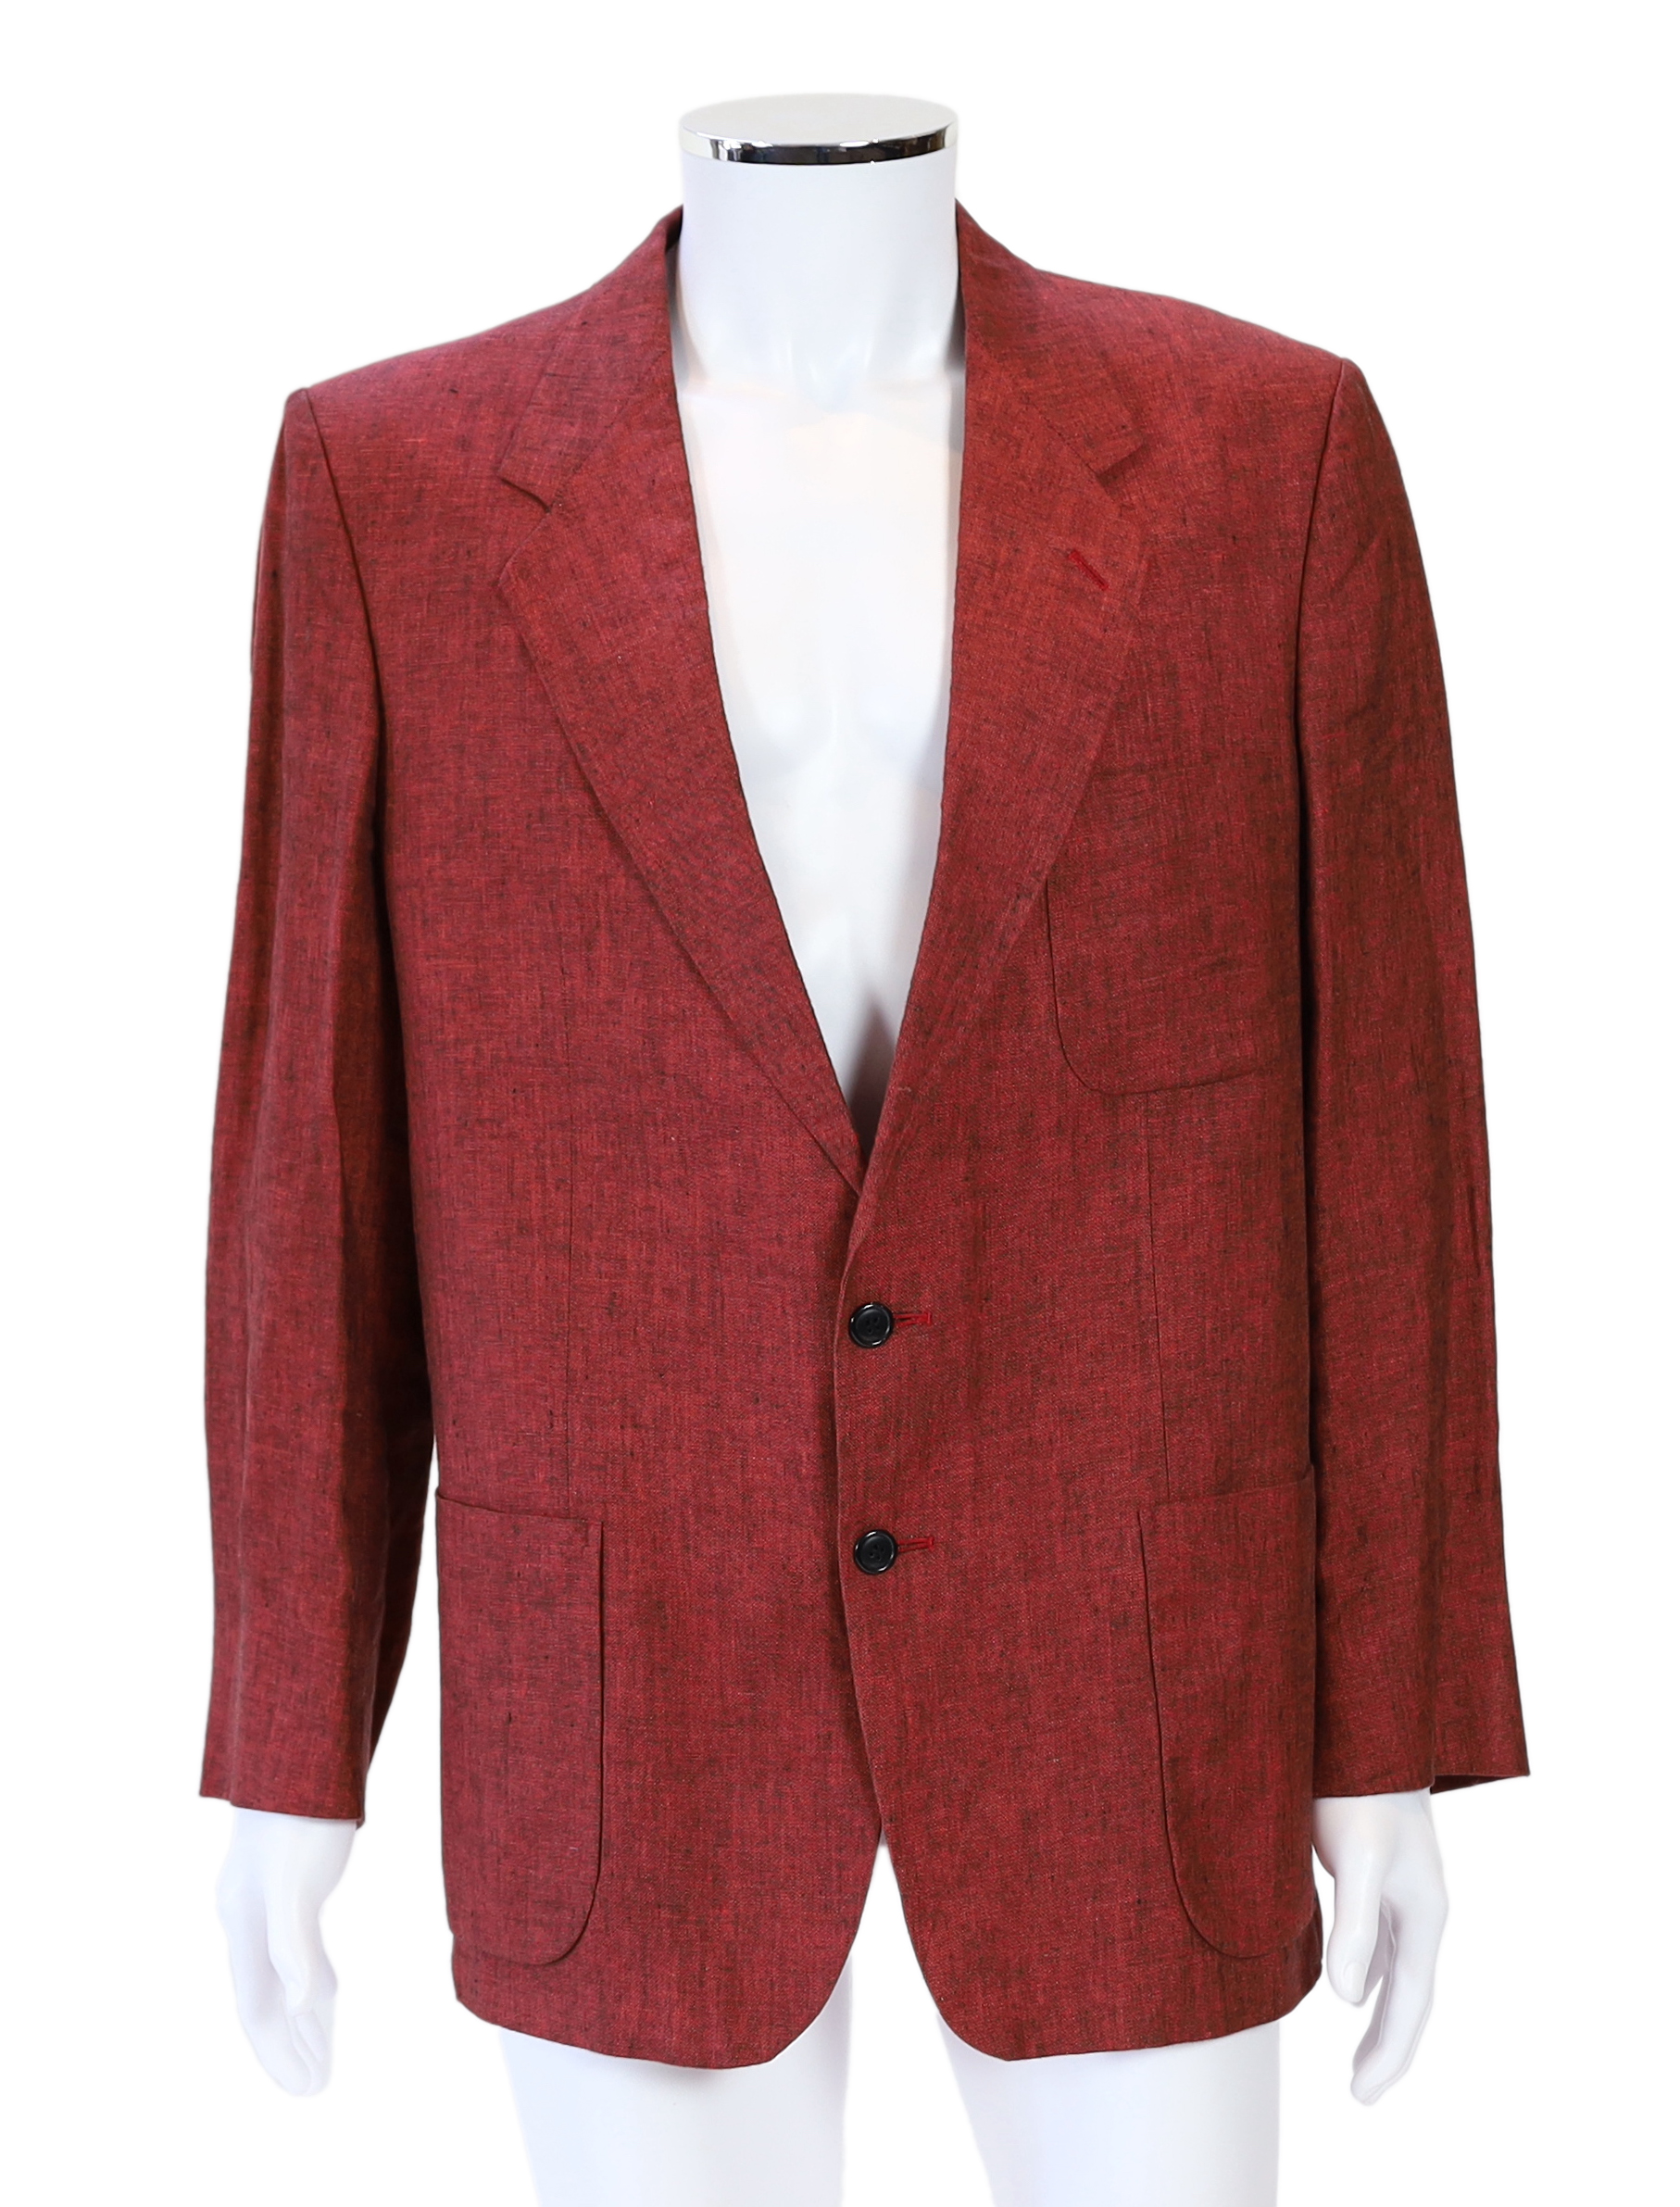 A Paul Smith gentleman's red marl linen single breasted suit, approx size 42